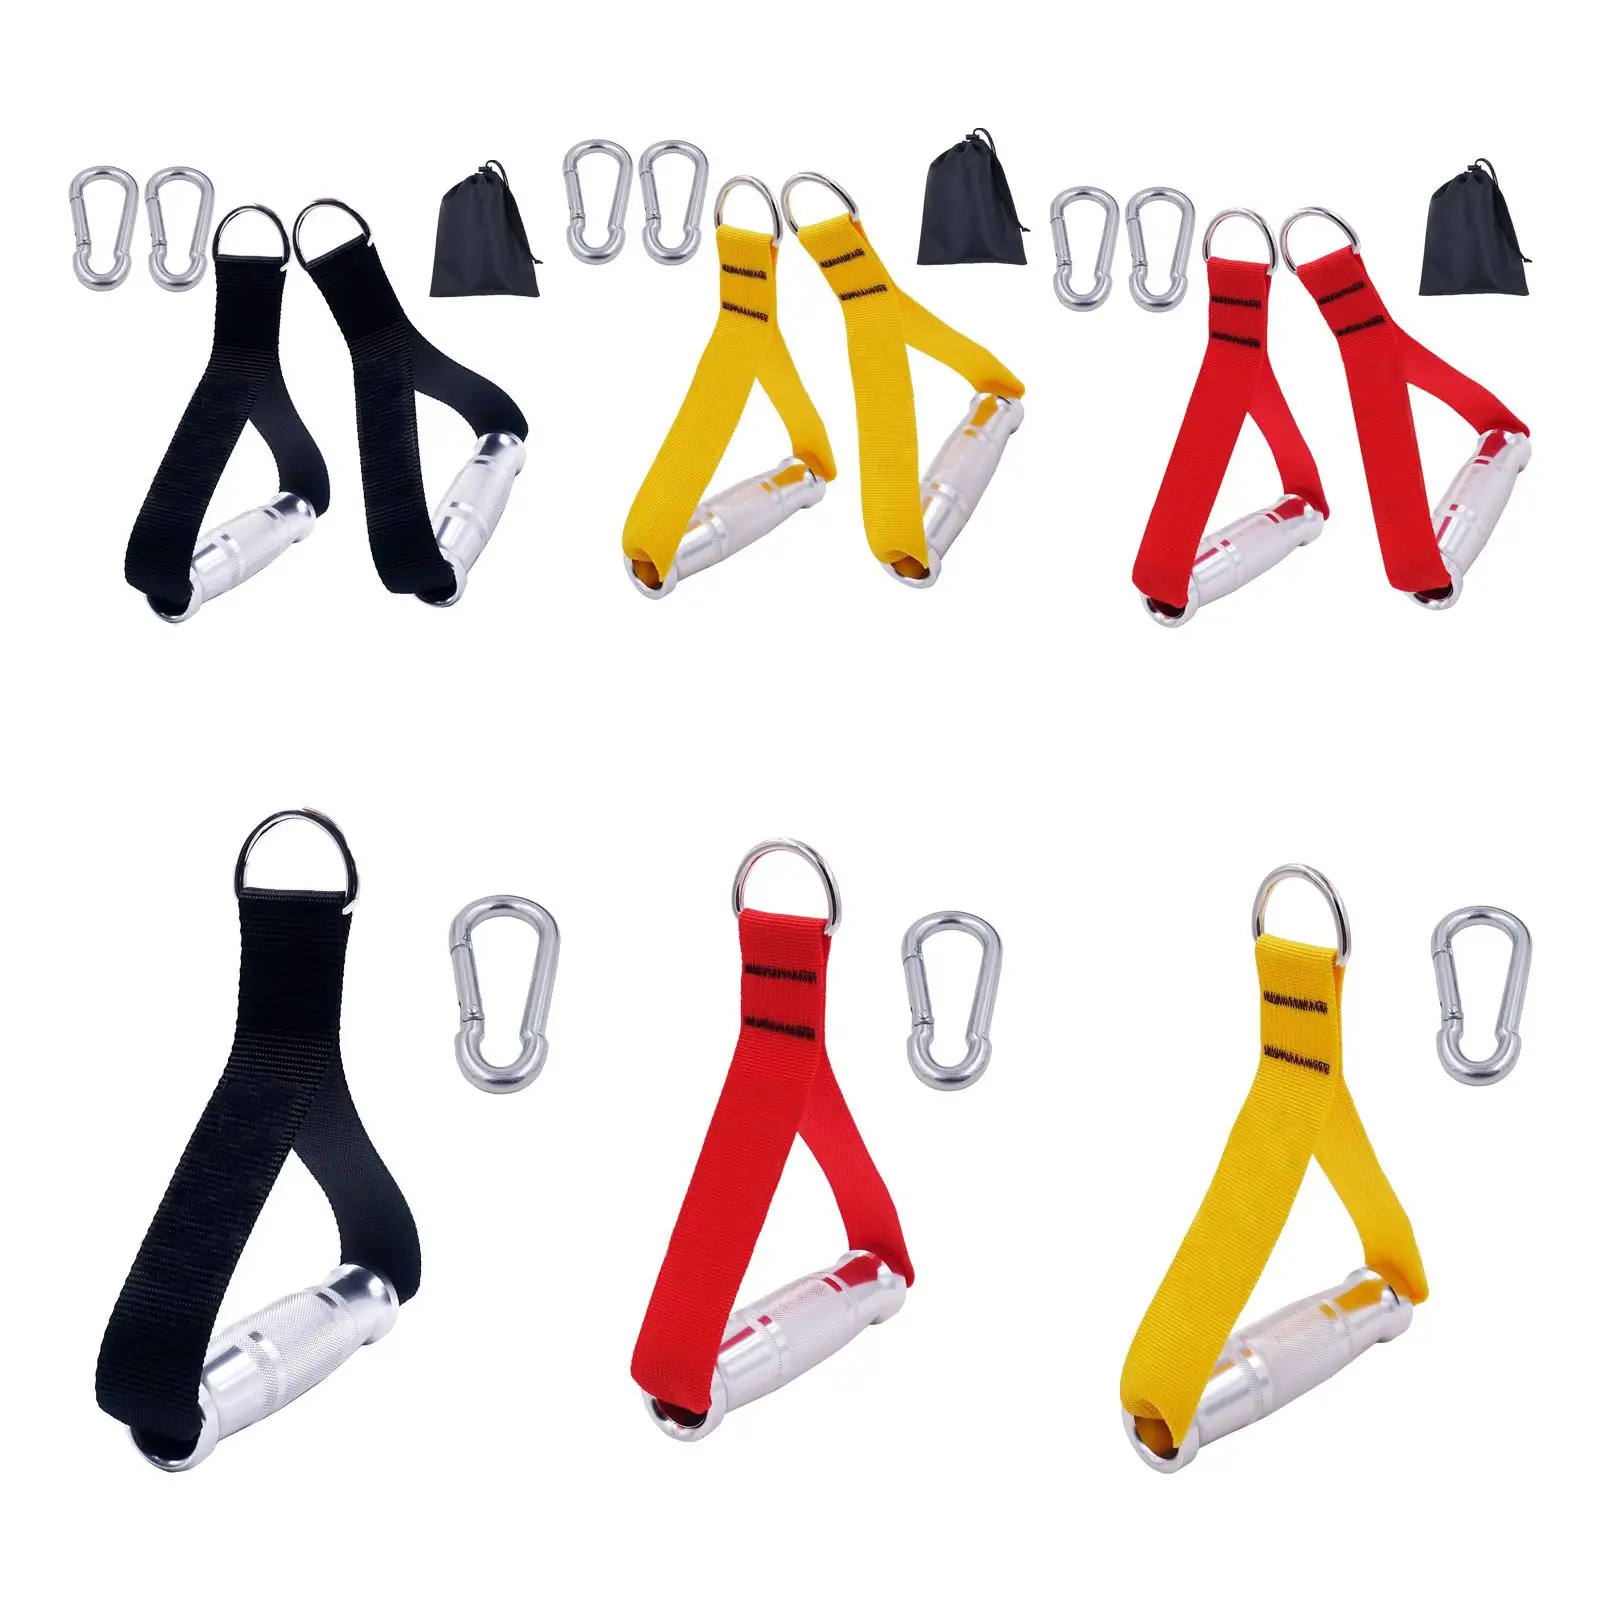 Resistance Bands Handle Strength Training Replacement Nylon Webbing Workout